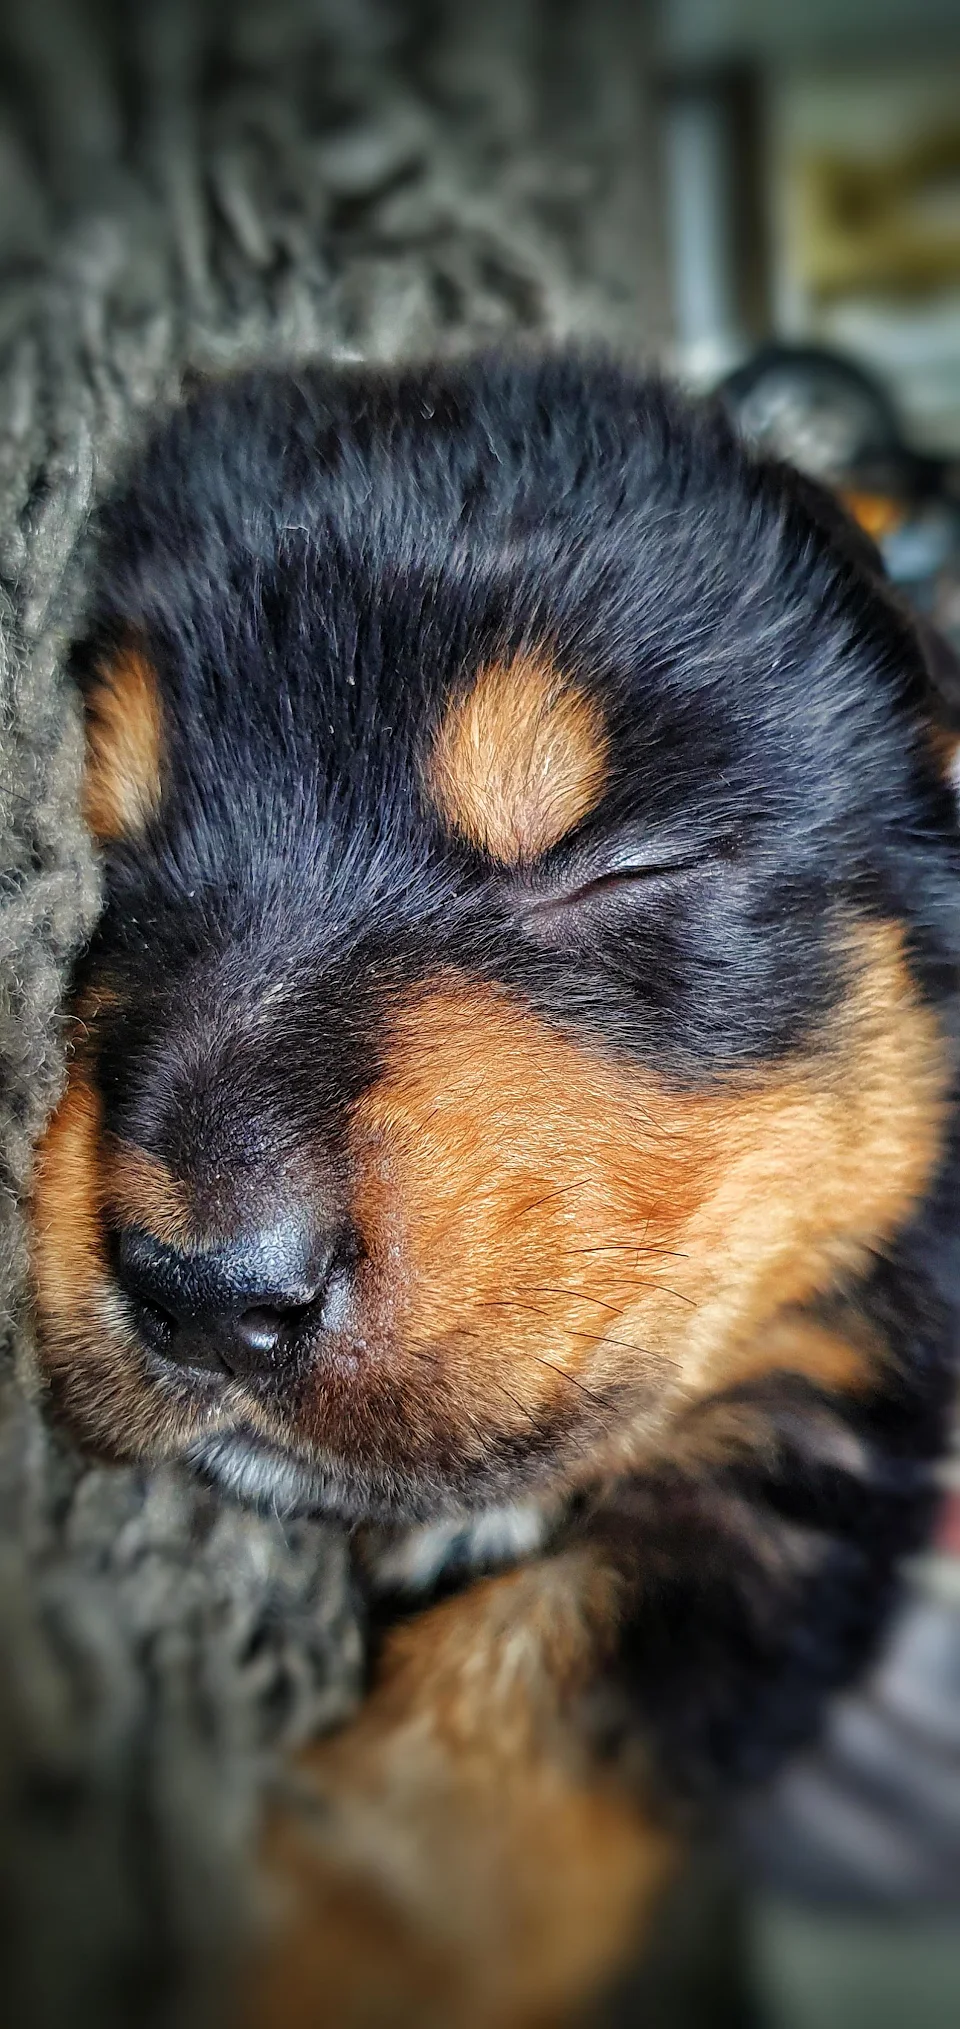 The only thing cuter than a puppy is a sleeping puppy